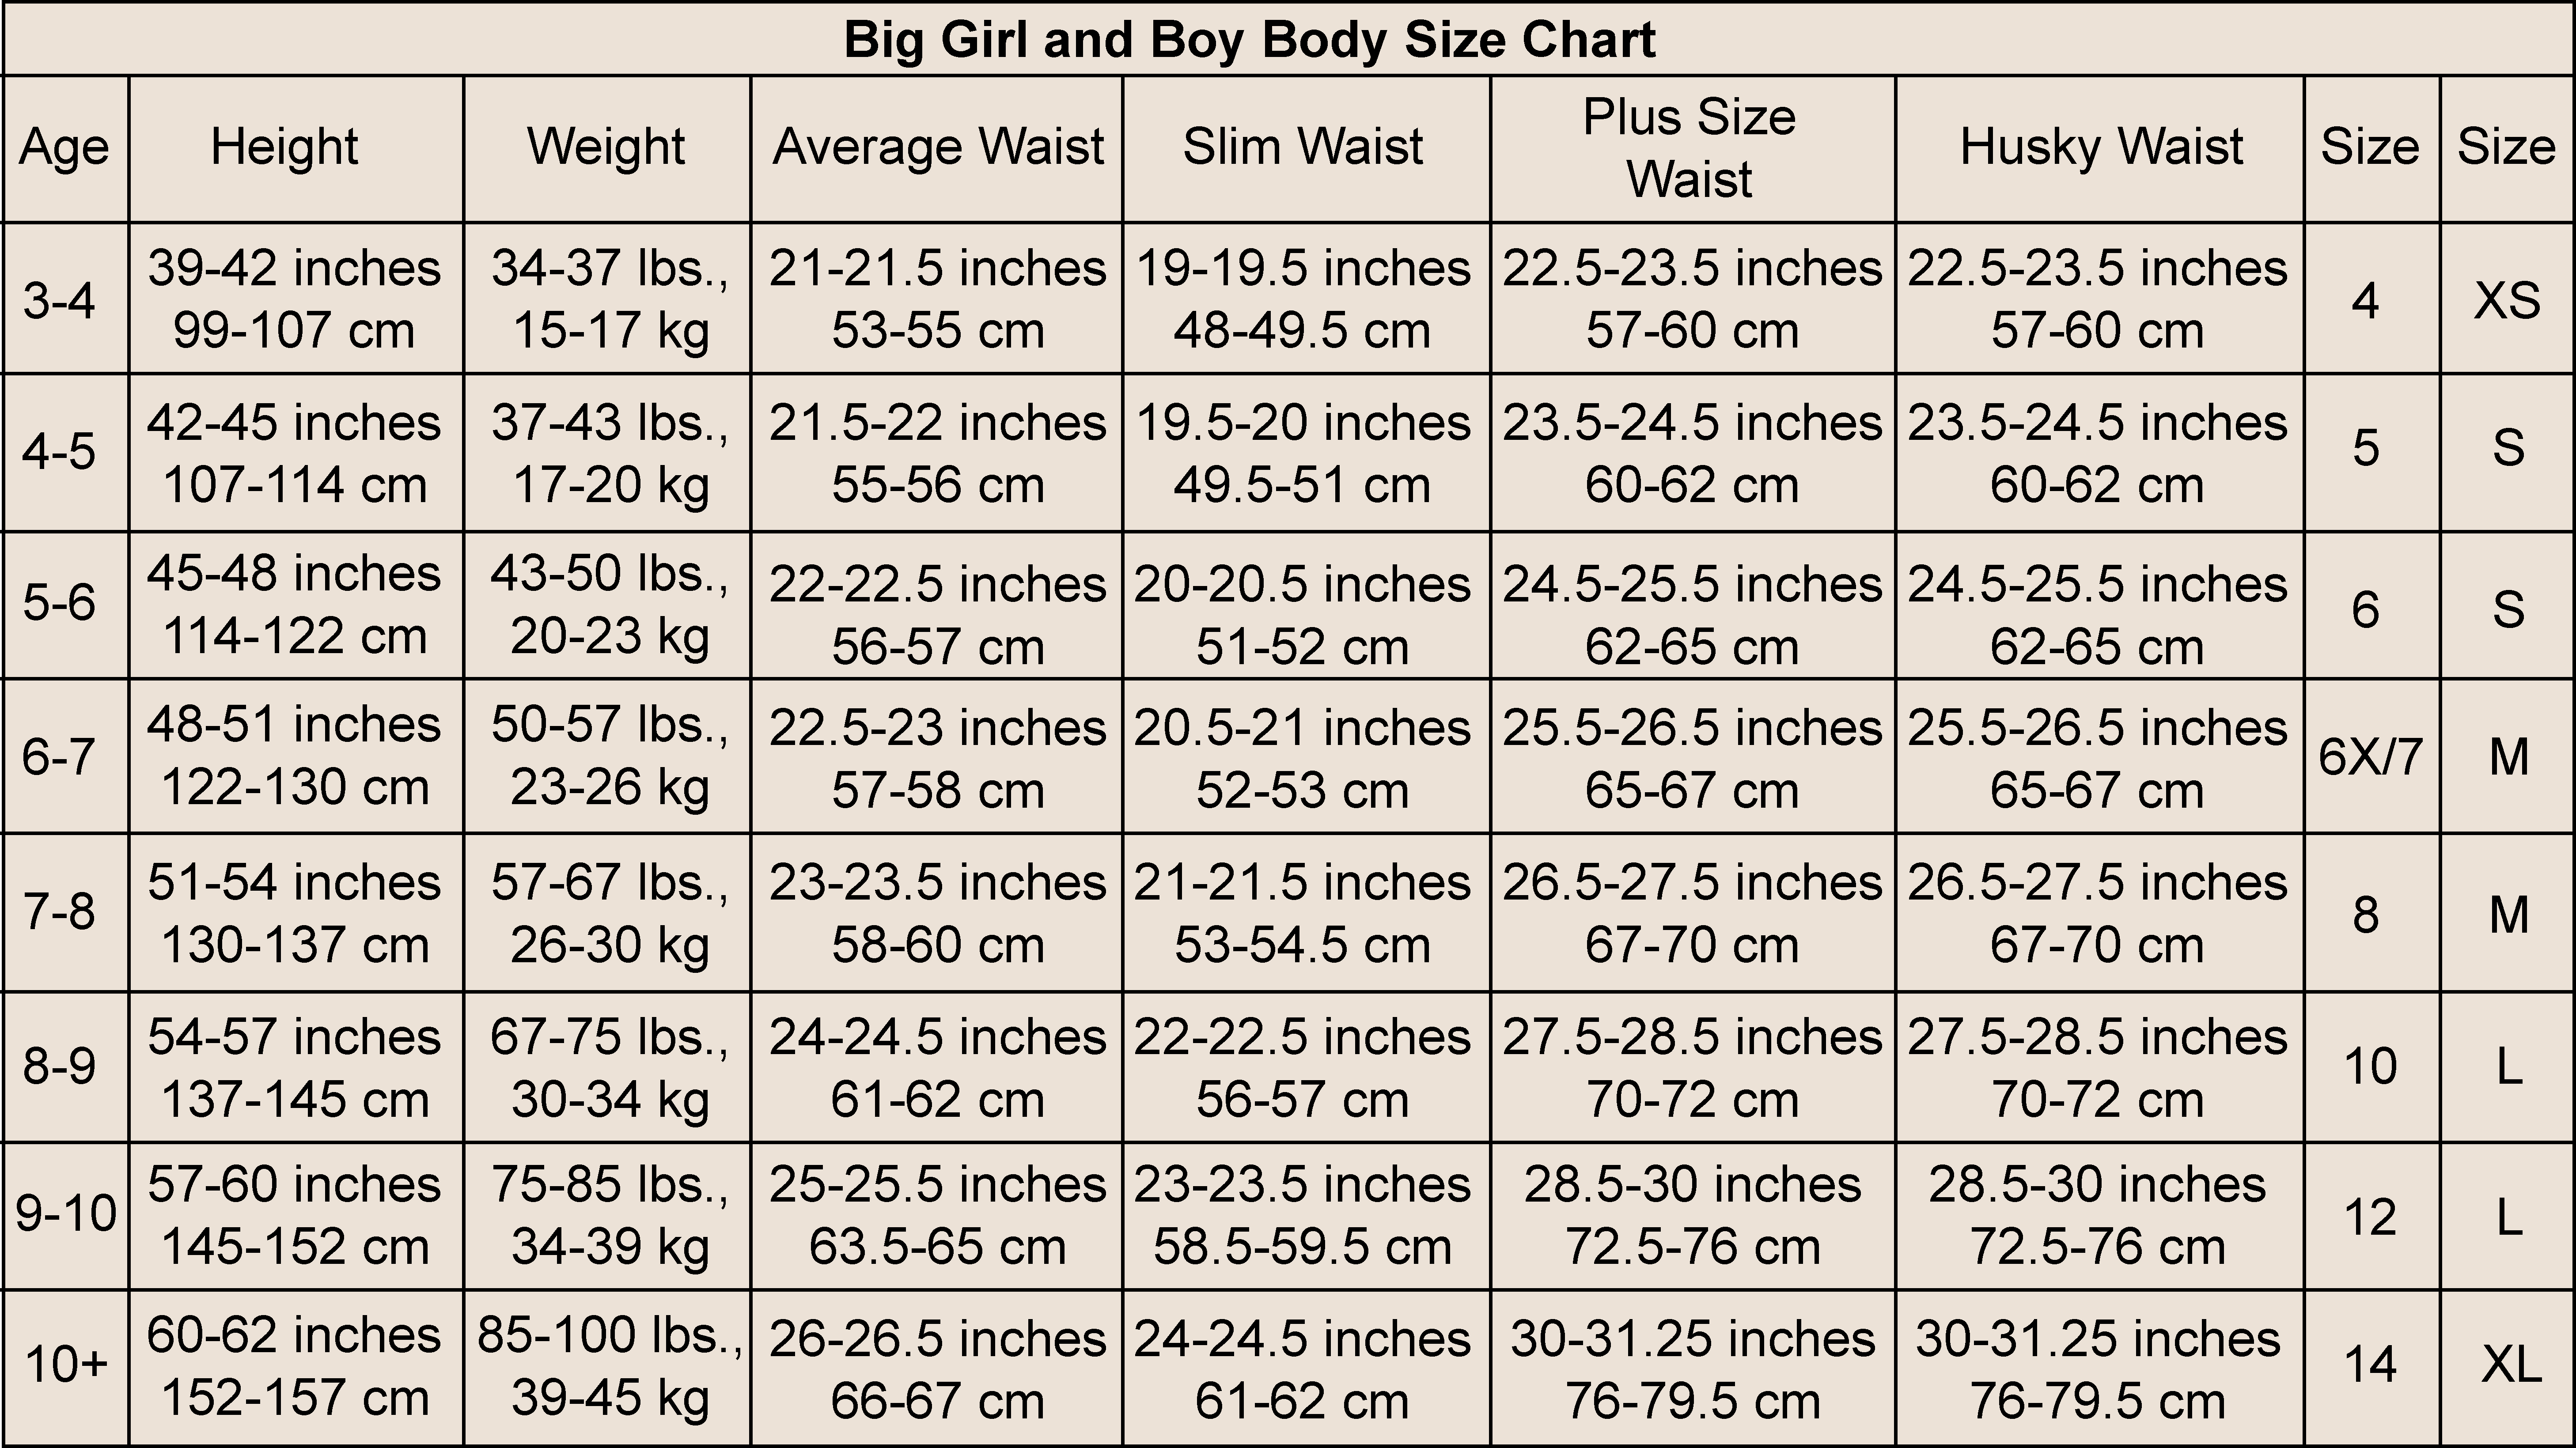 Size chart for big girls and boys